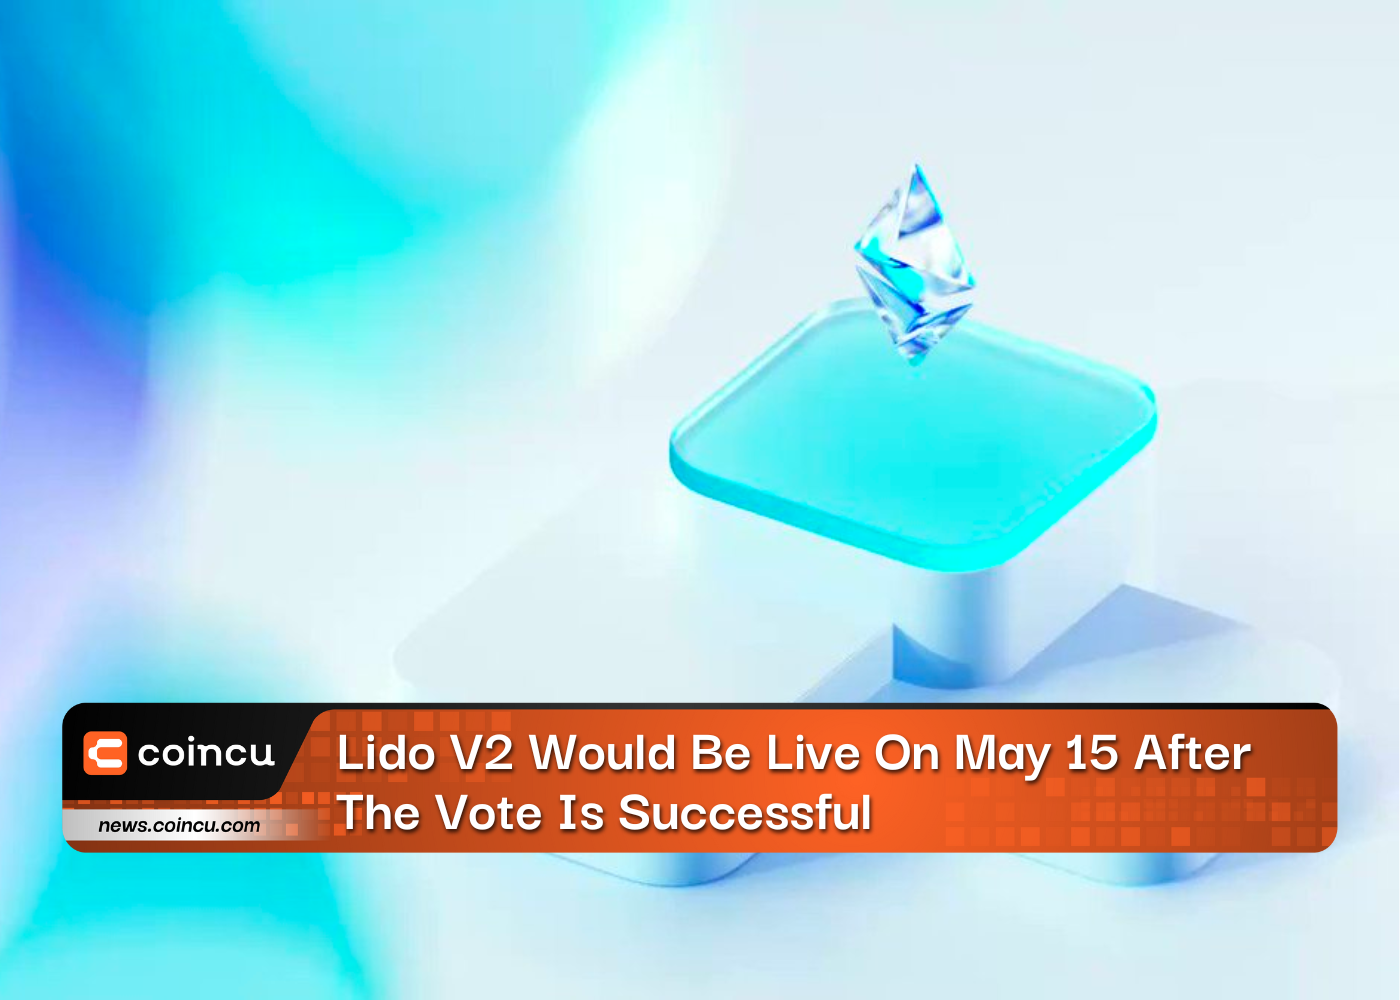 Lido V2 Would Be Live On May 15 After The Vote Is Successful